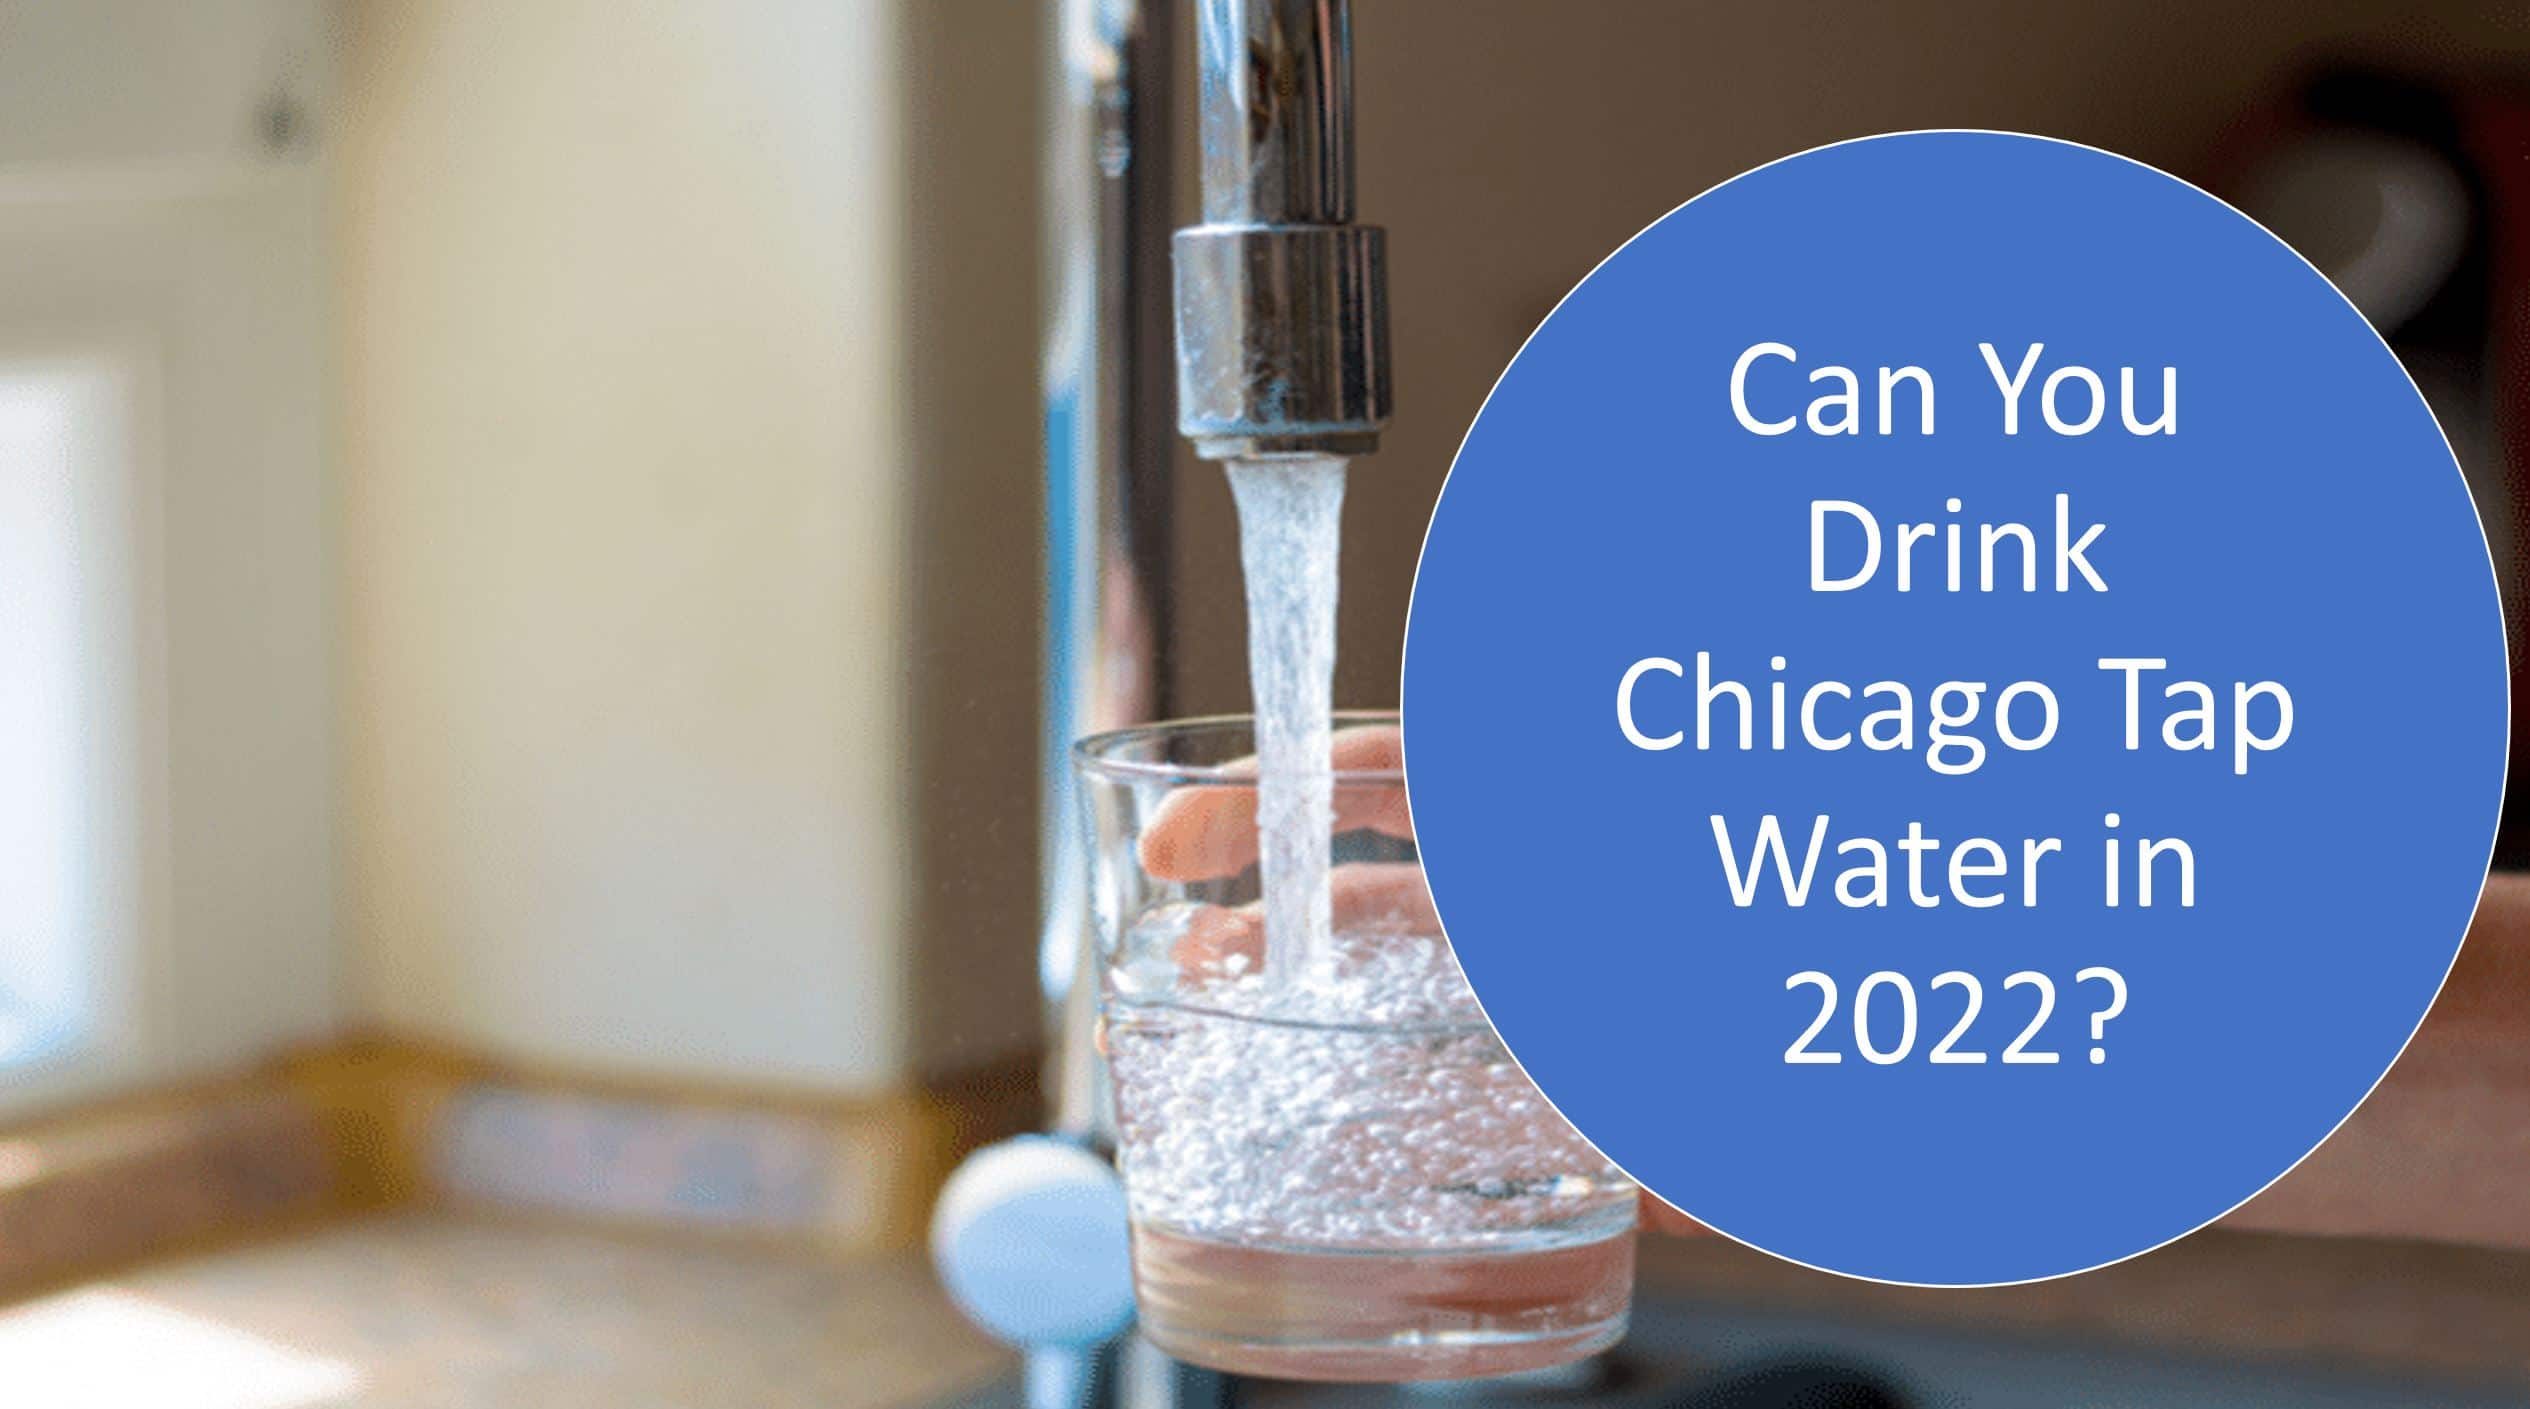 Can You Drink Chicago Tap Water in 2022?